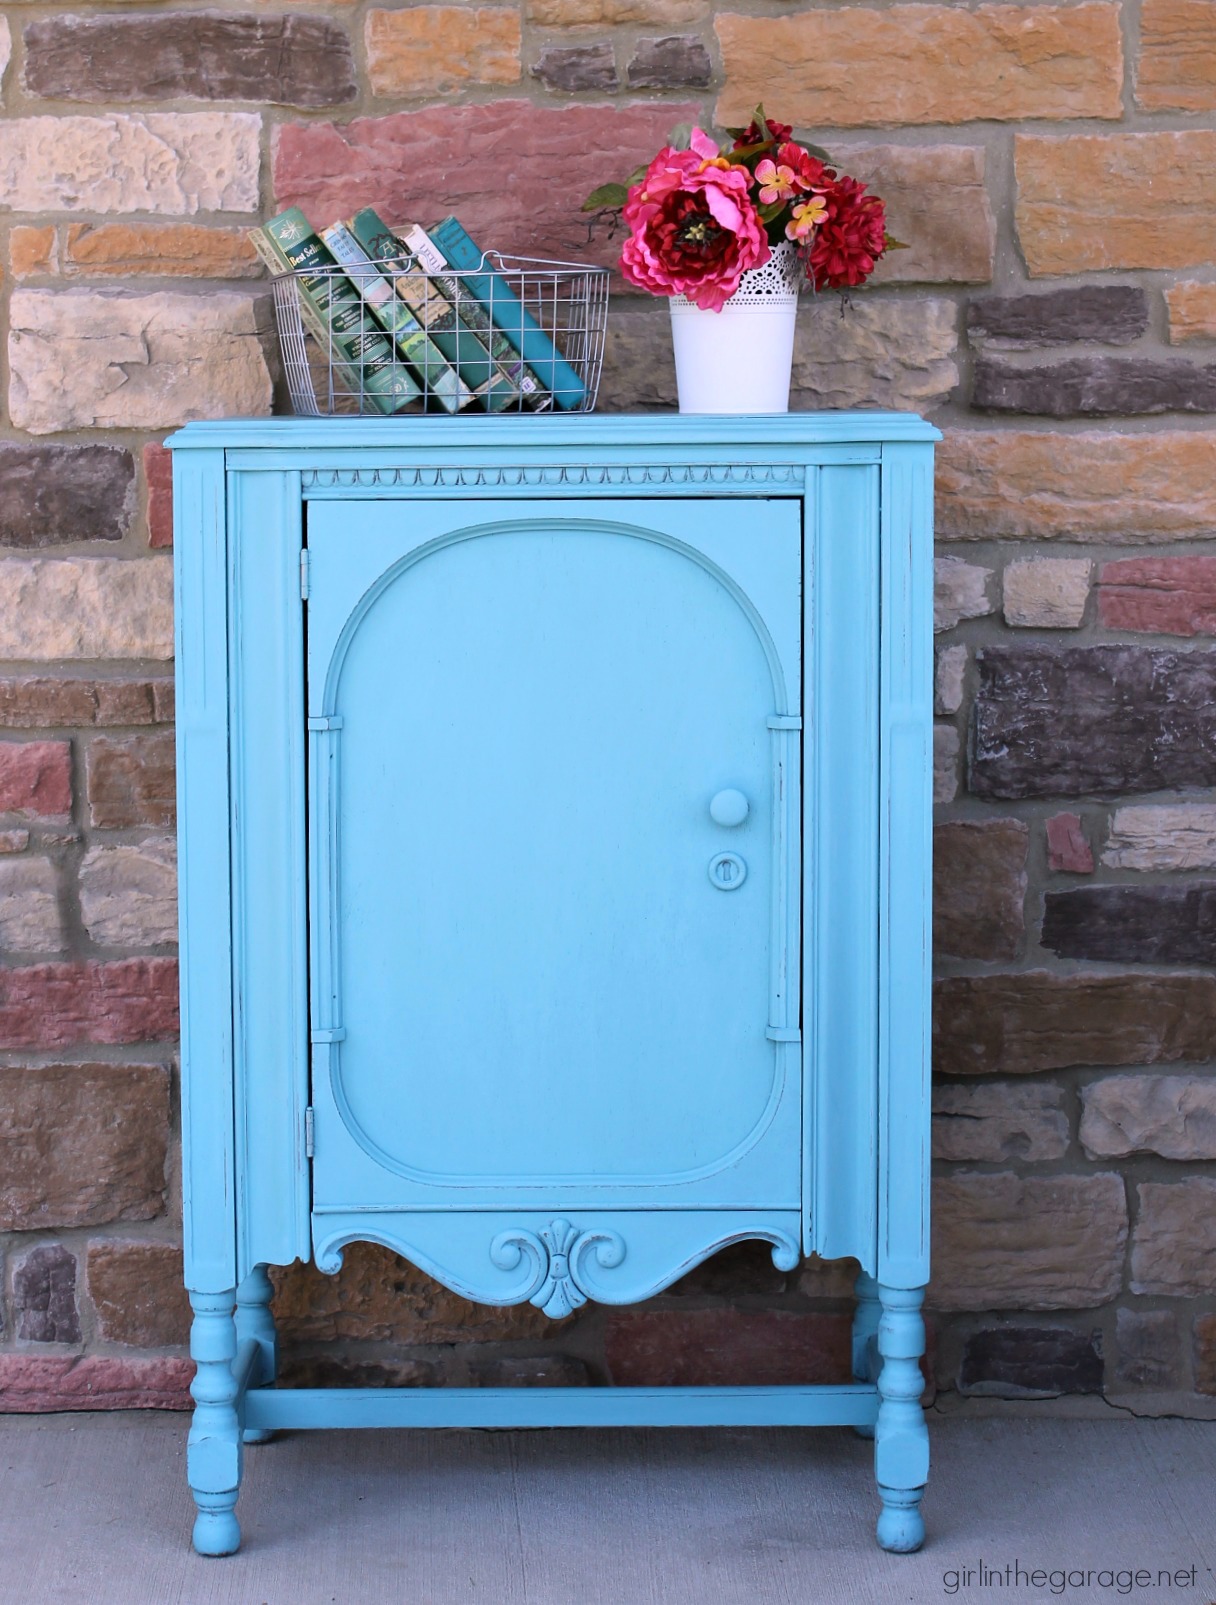 Thrifted repurposed radio cabinet makeover to storage cabinet with shelves. Annie Sloan Chalk Paint in Provence turquoise. DIY tutorial by Girl in the Garage.